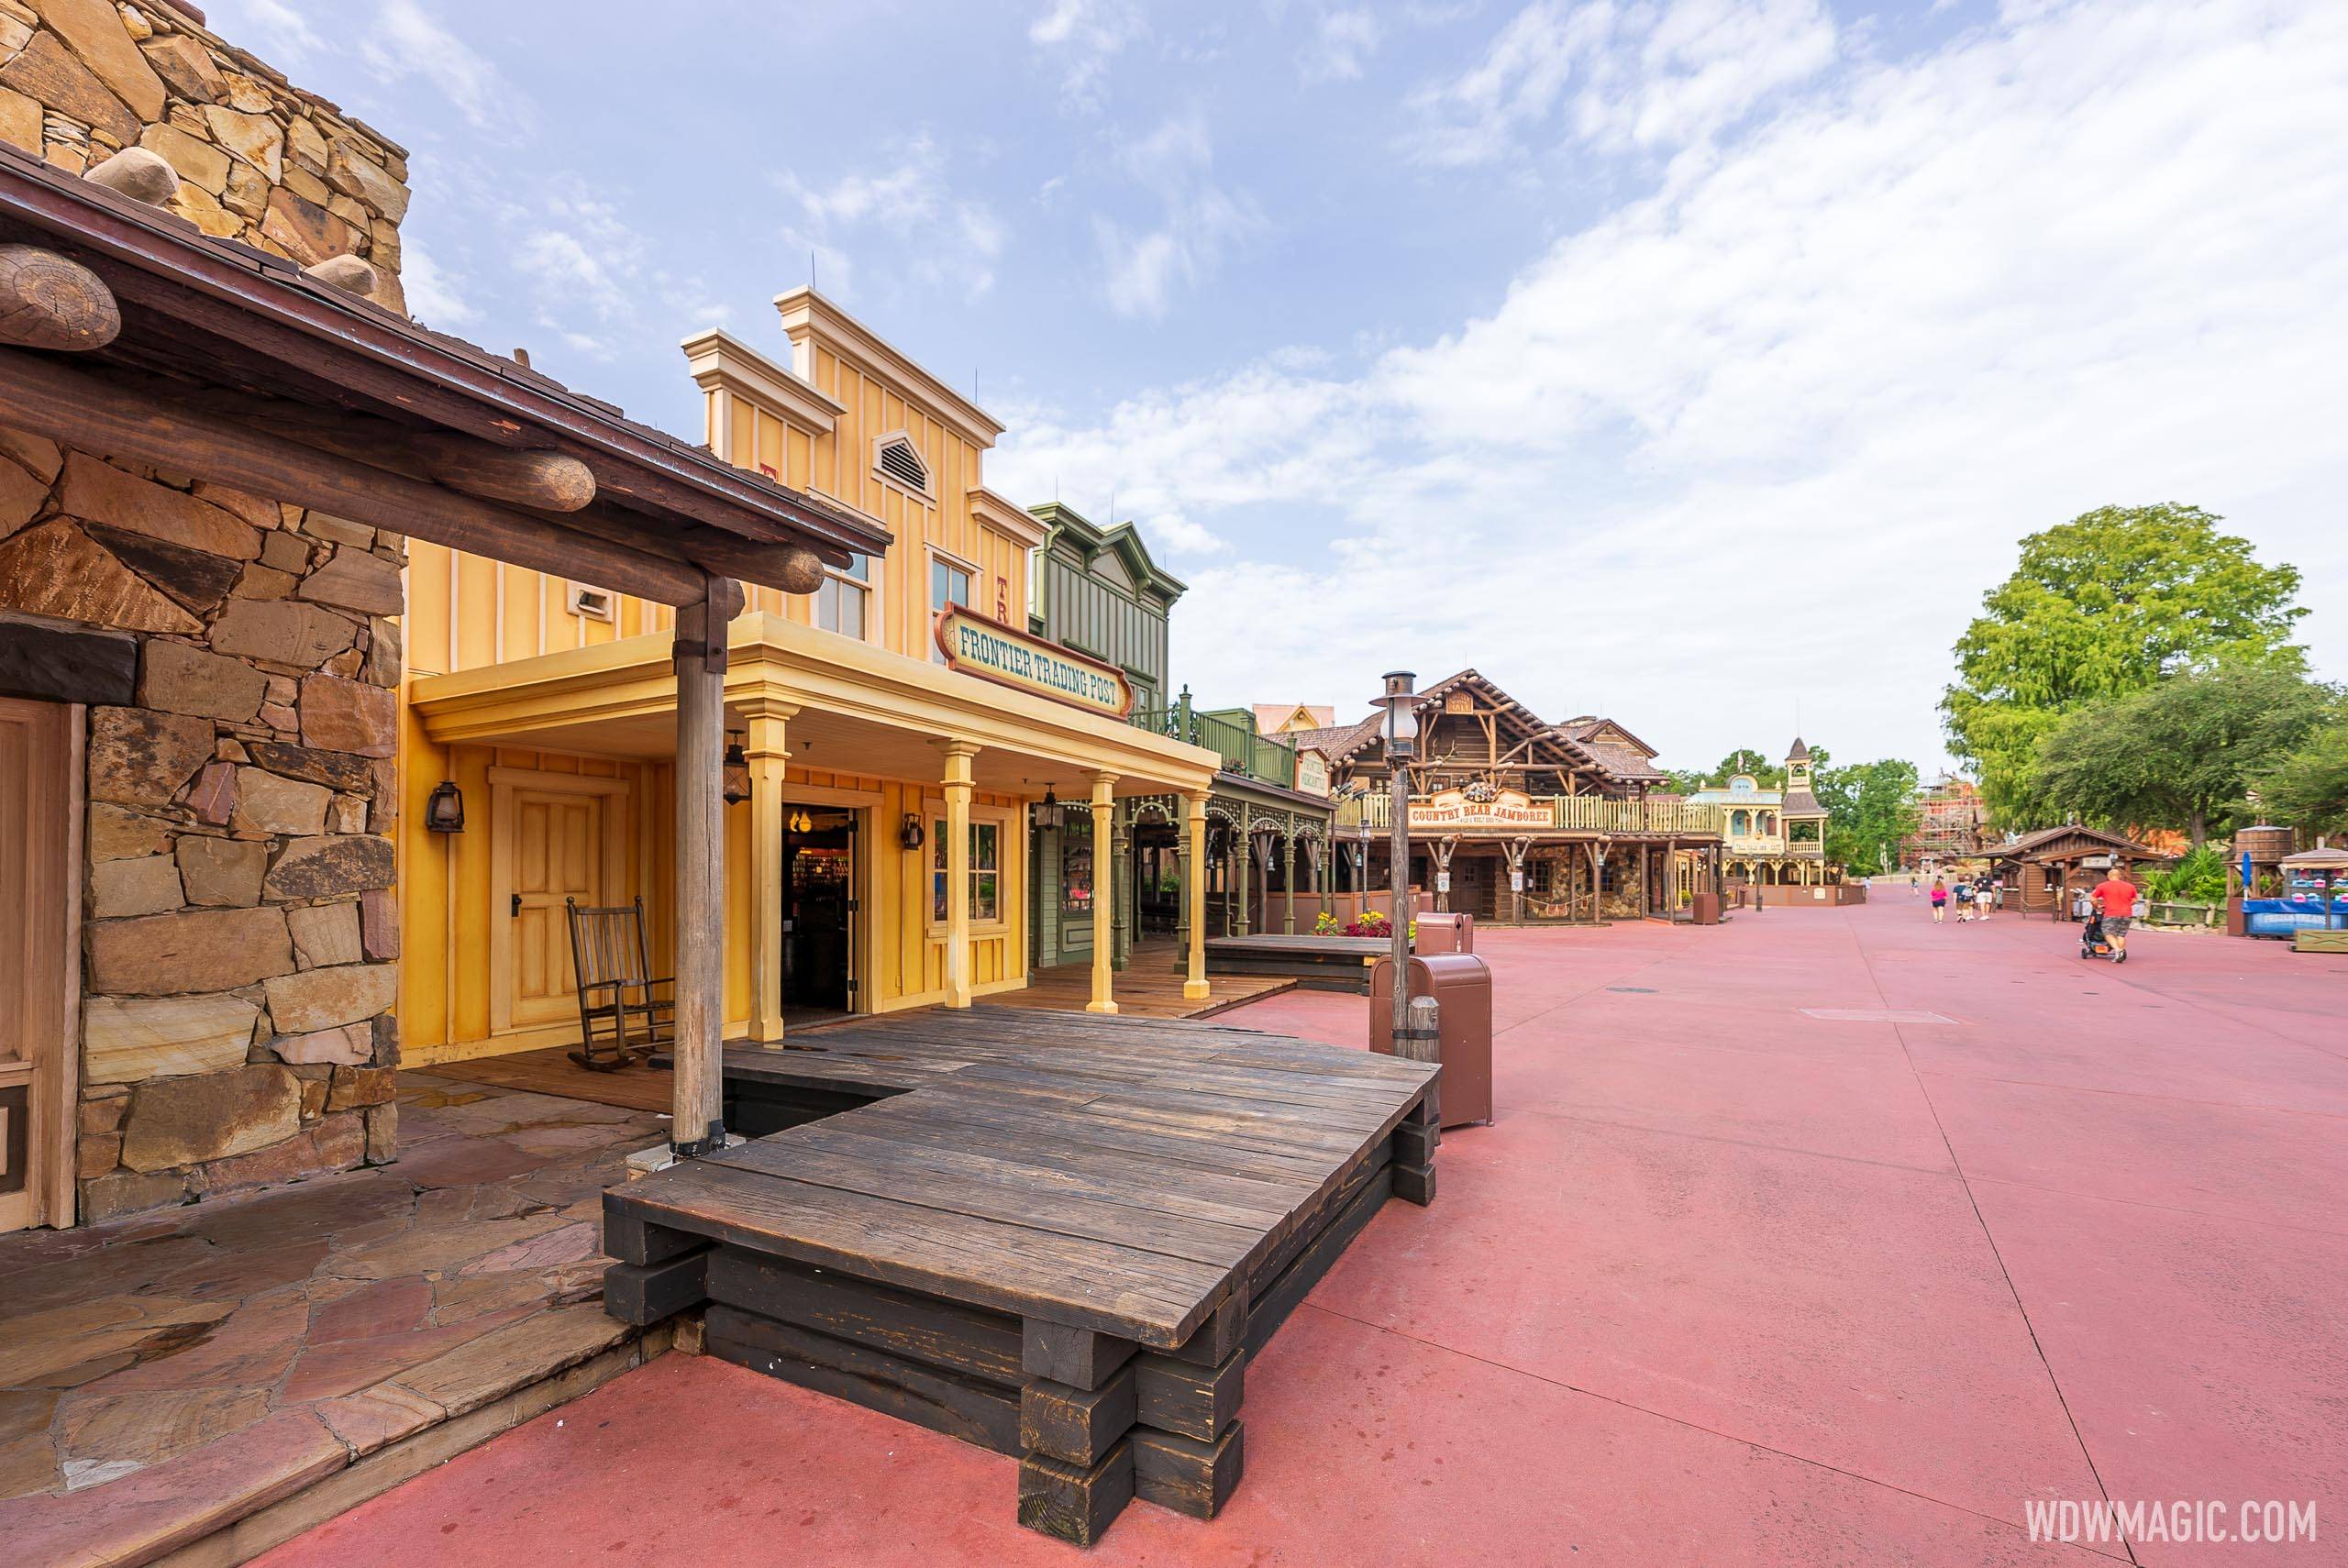 Disney World's Frontierland gets a new look as changes come to the boardwalk walkways including raised platforms